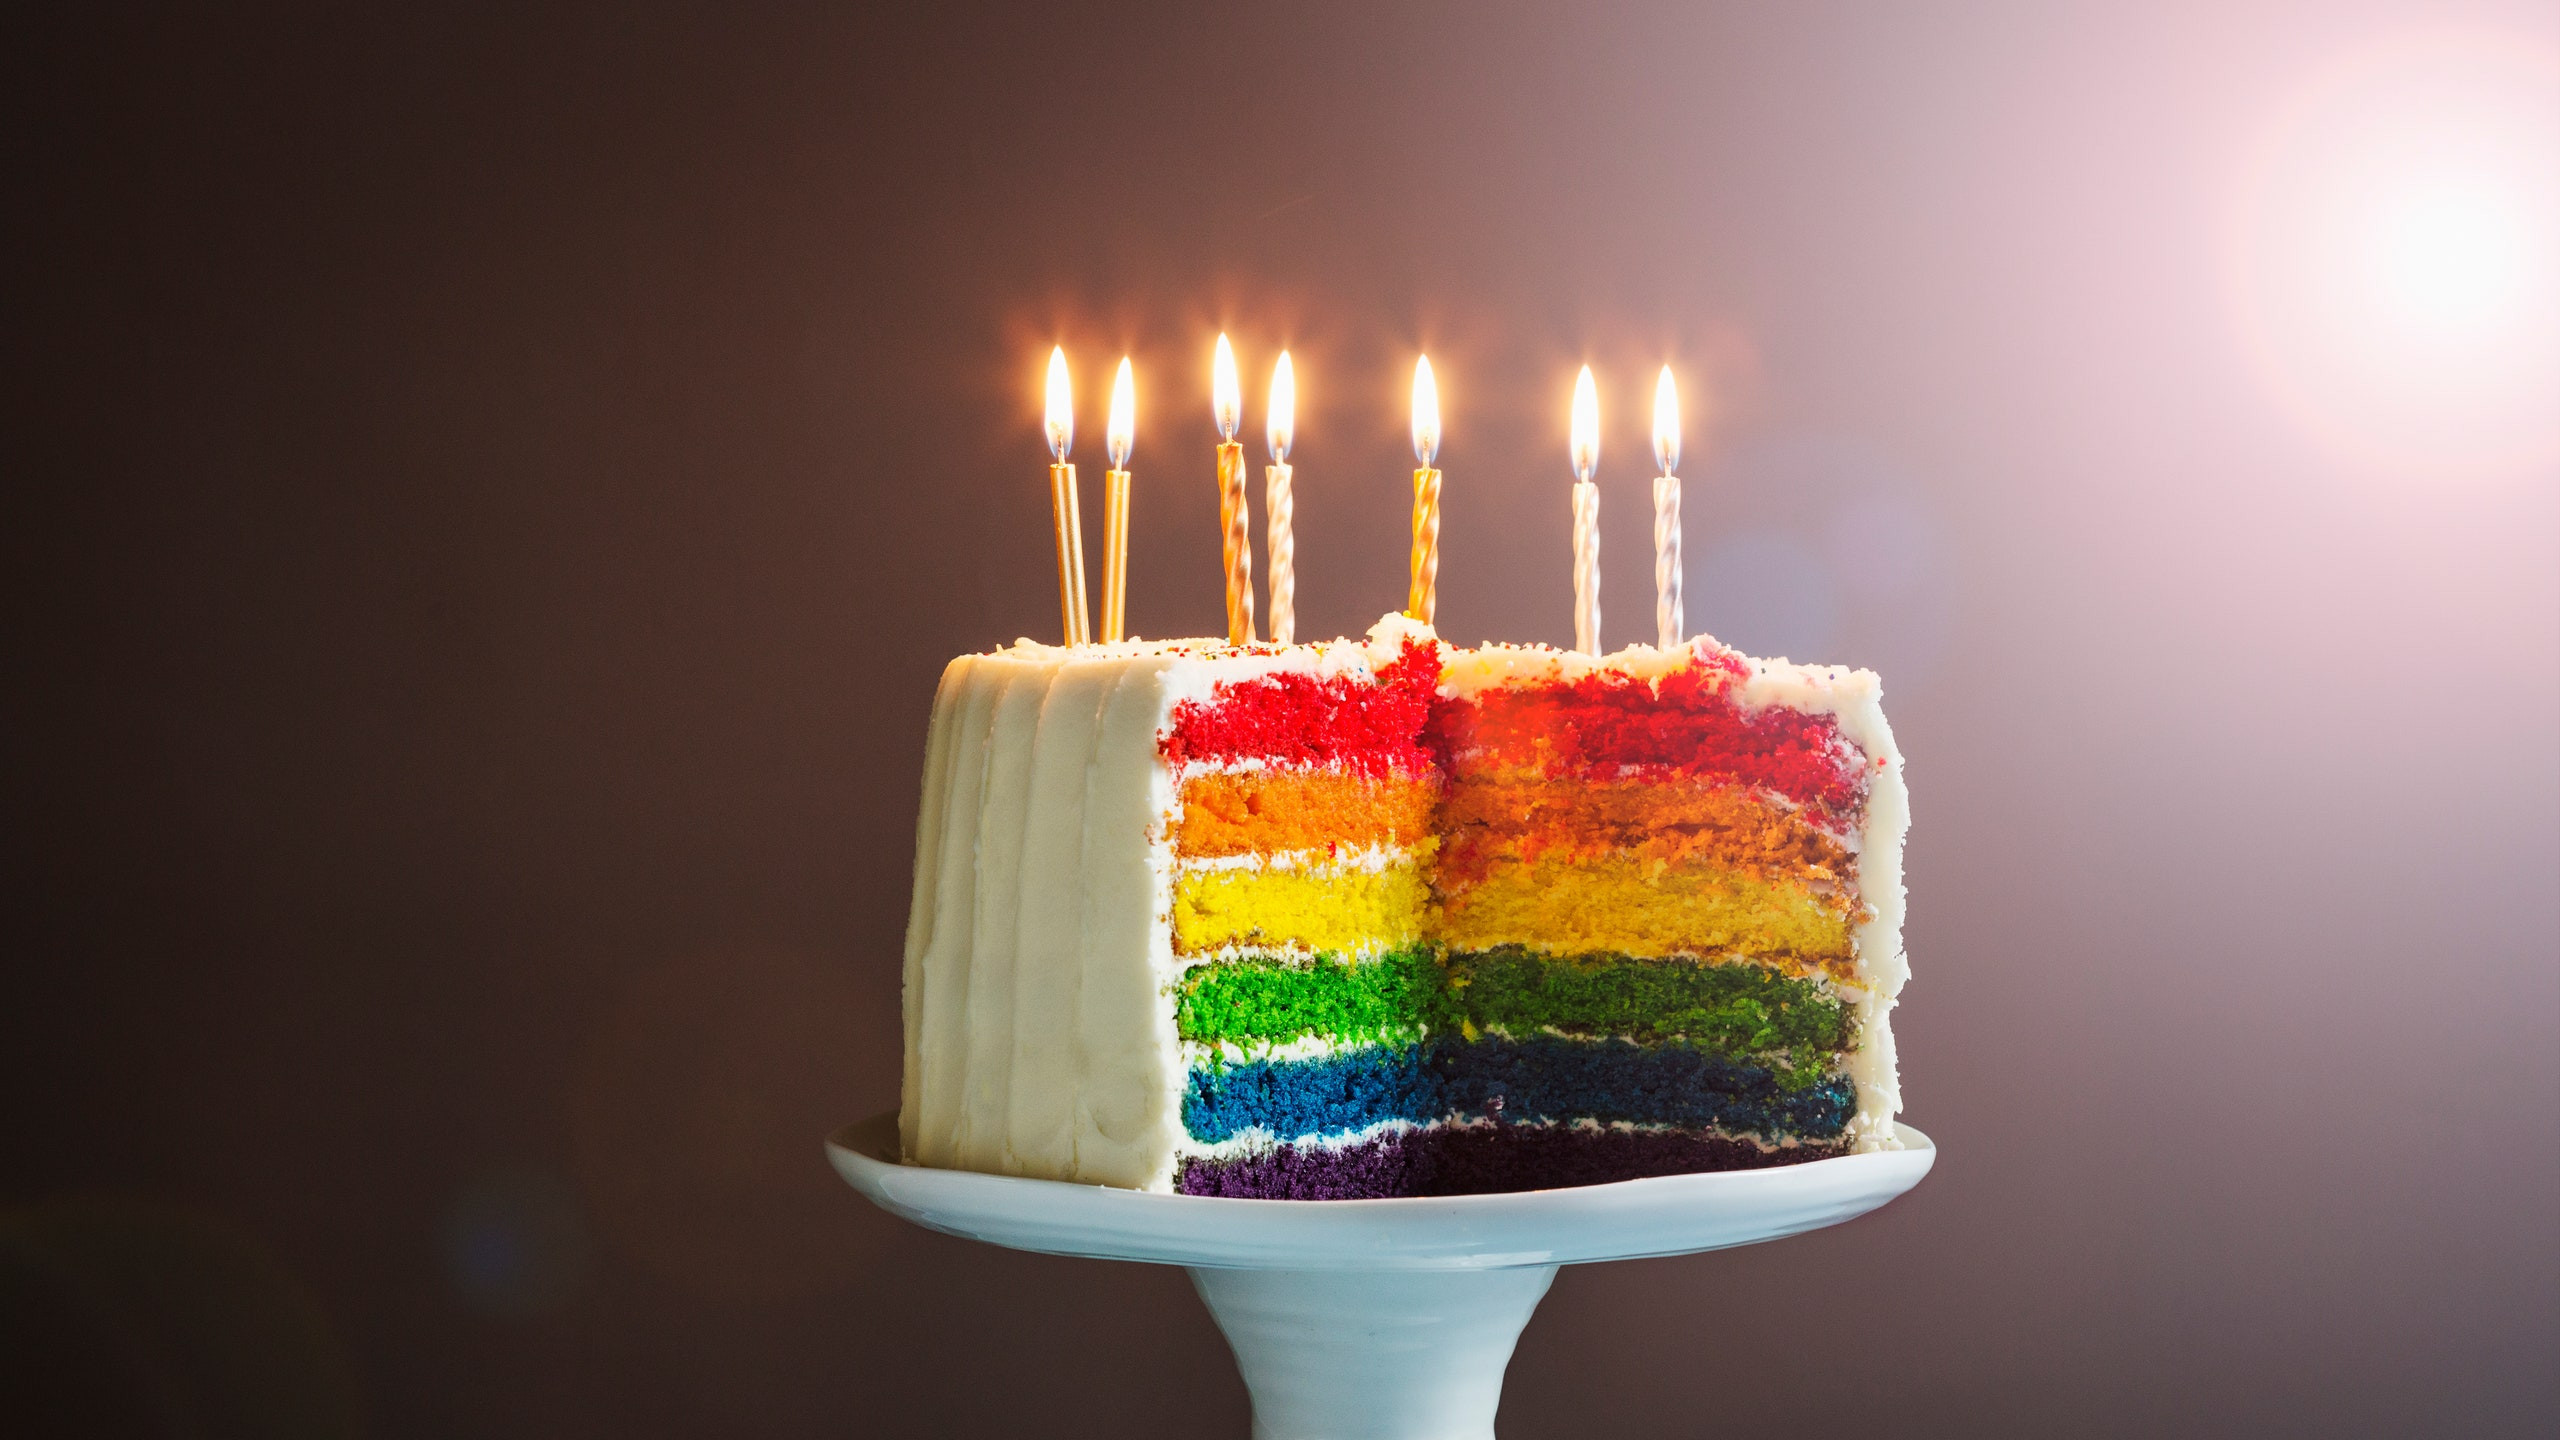 Birthday Cake Candle
 Blowing Out Birthday Cake Candles Increases Bacteria on